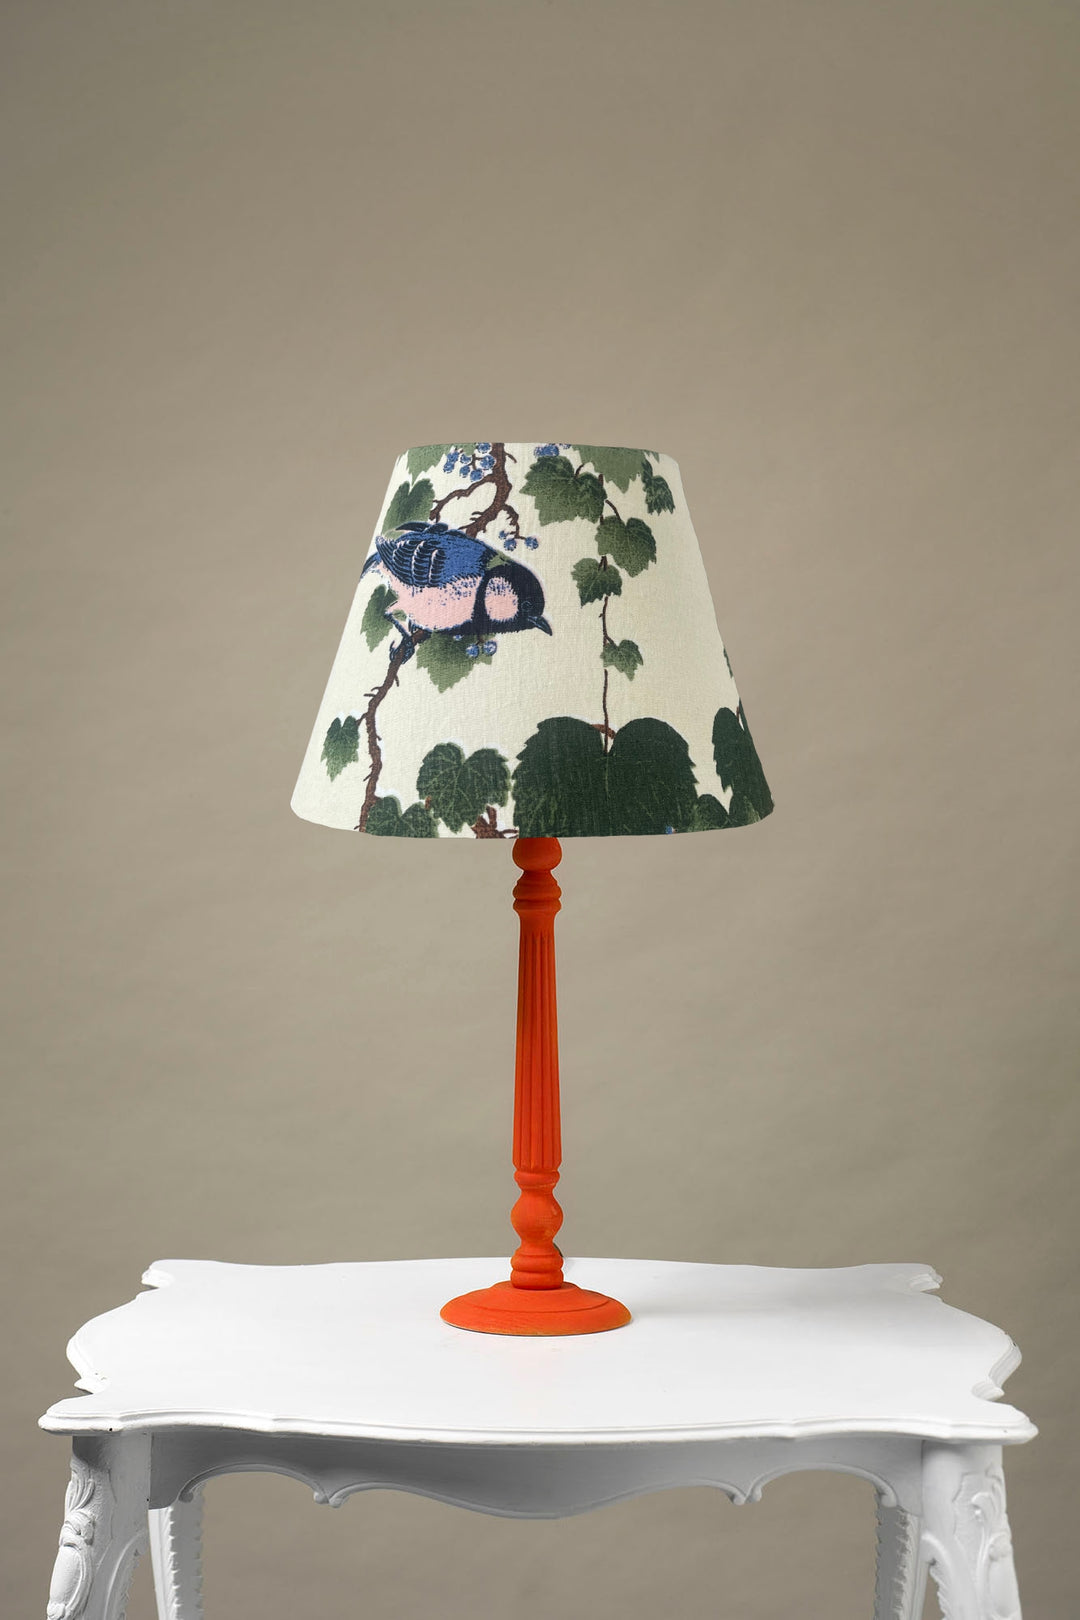 Large handmade lampshade for autumn winter with green maple leaf pattern on a cream background by One Hundred Stars